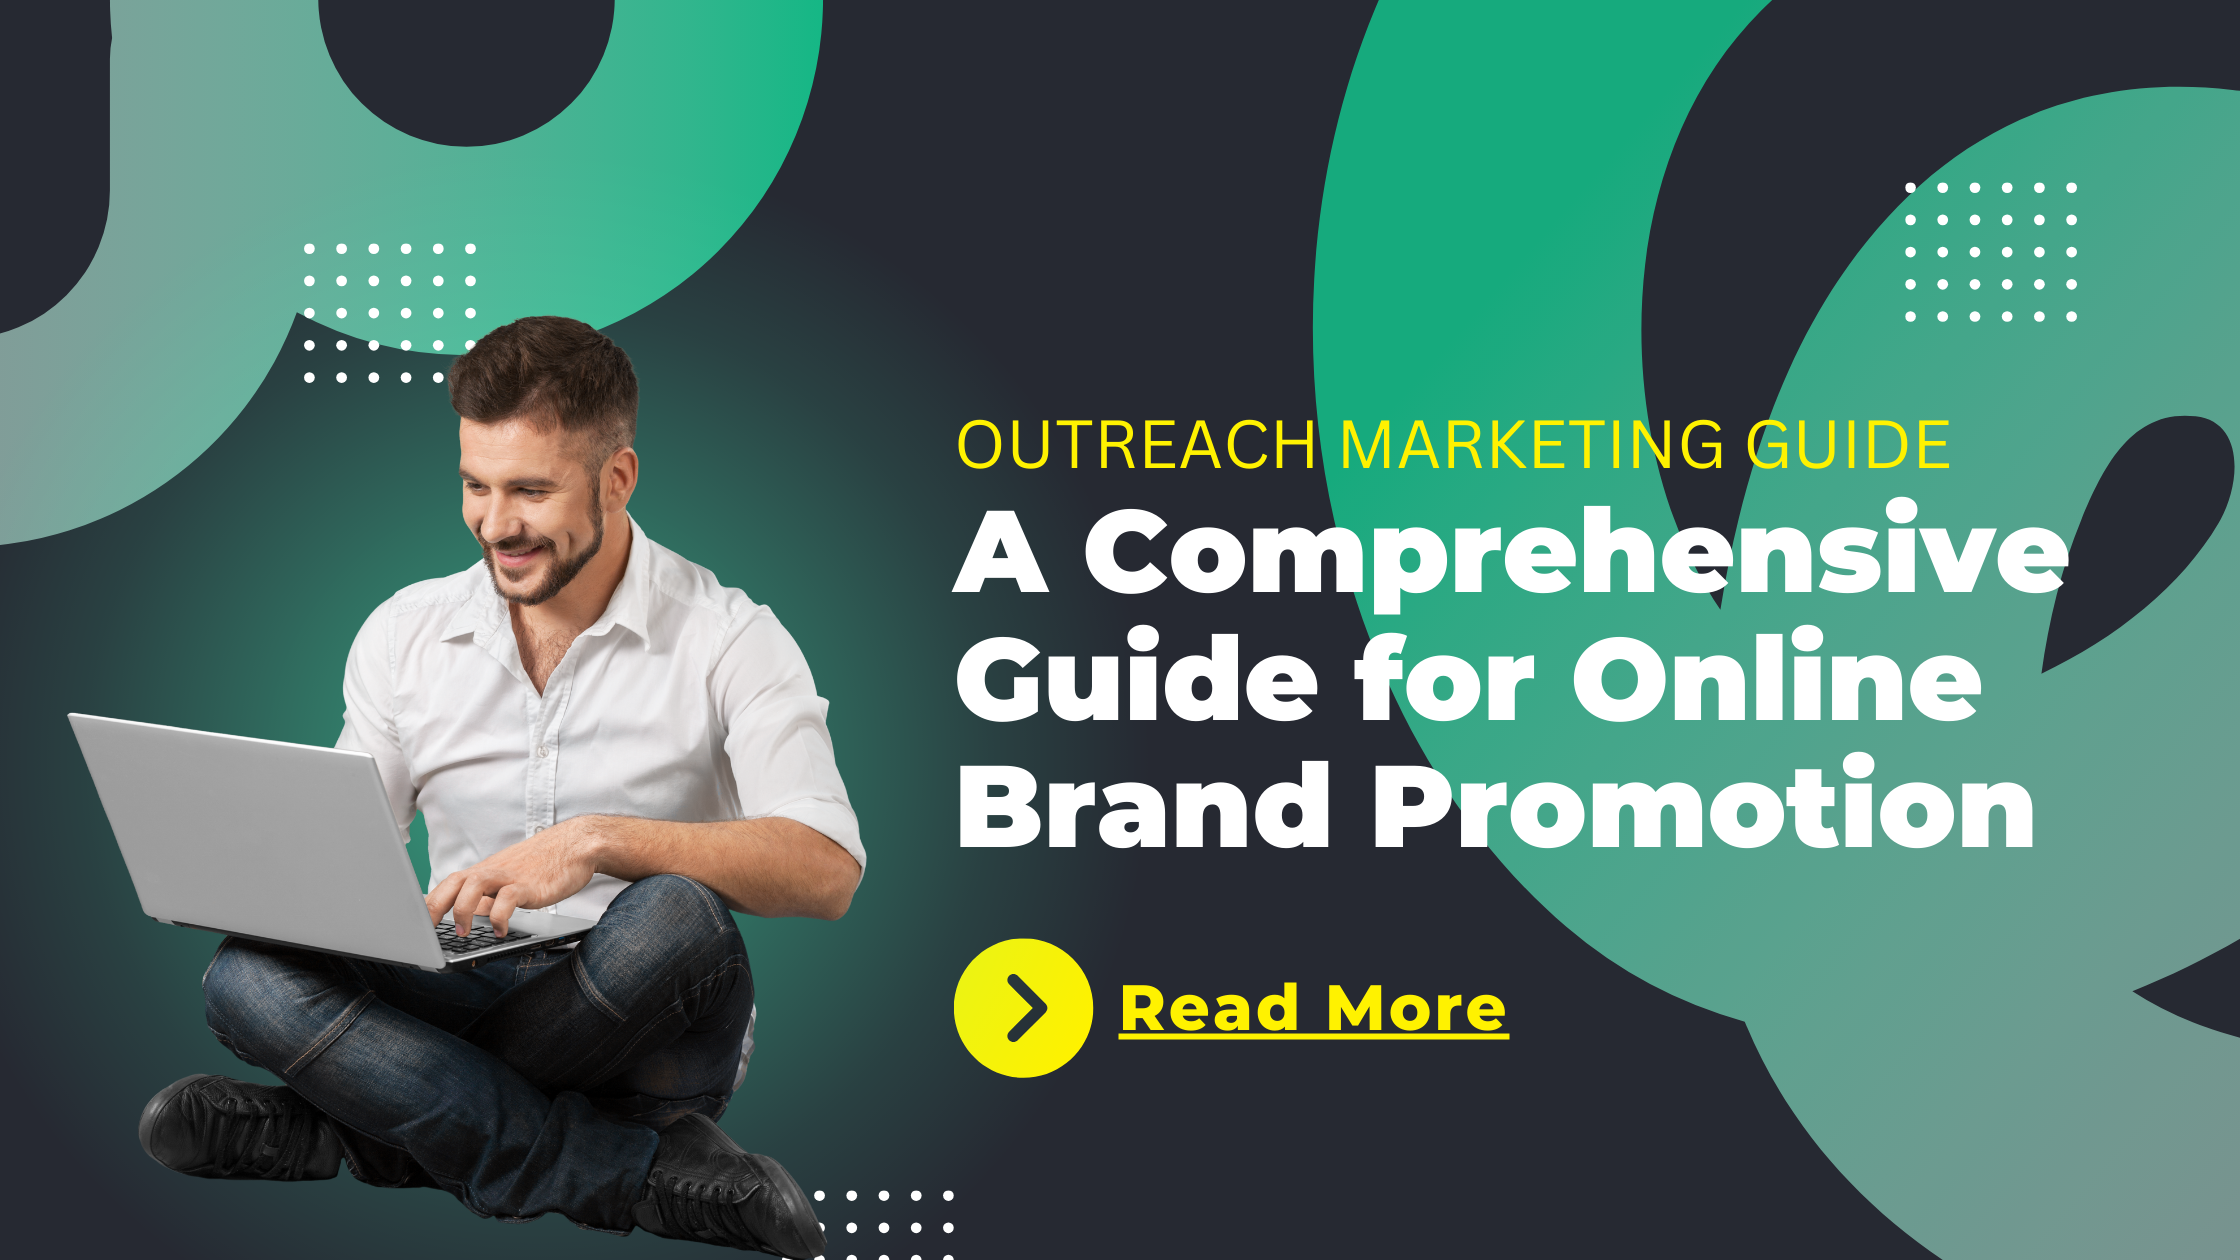 Outreach Marketing Guide A Comprehensive Guide for Online Brand Promotion Outreach